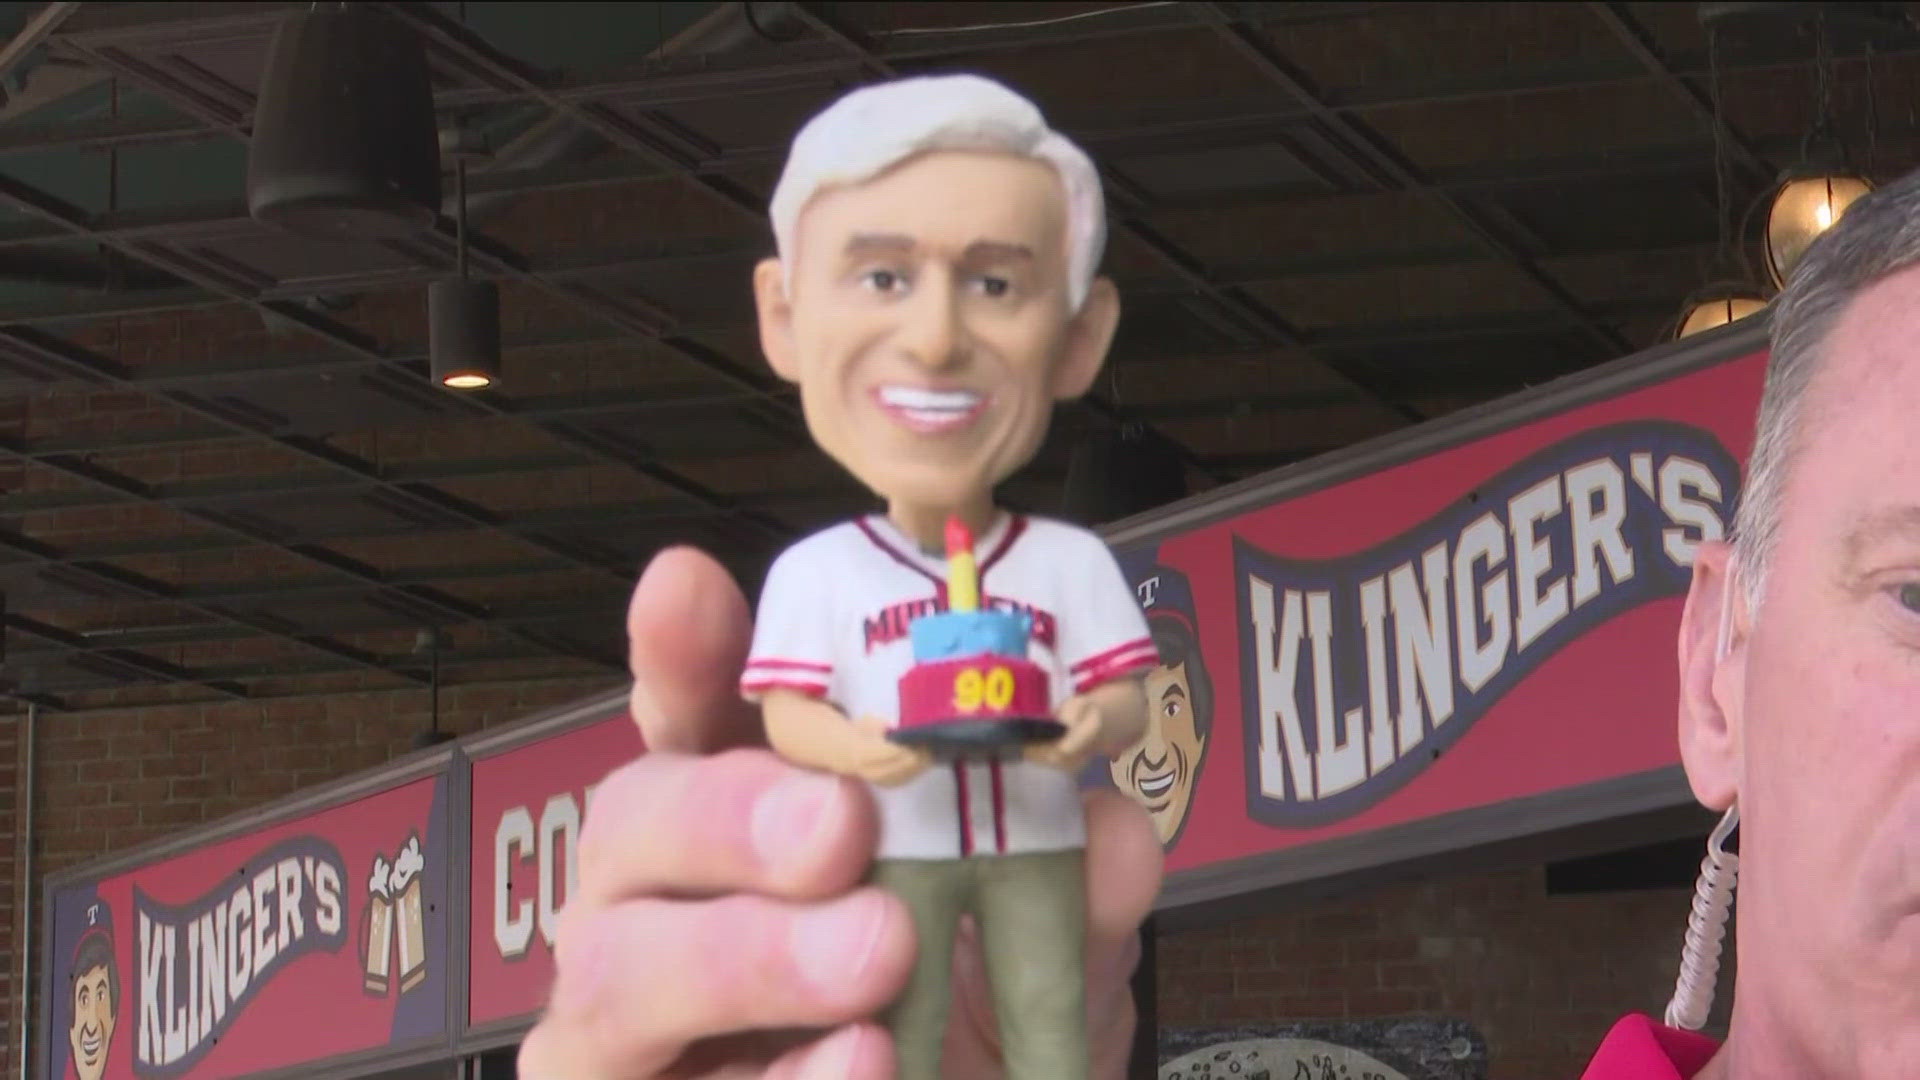 At Monday's Mud Hens game, the first 1,500 fans will receive a Jamie Farr bobblehead for his 90th birthday.